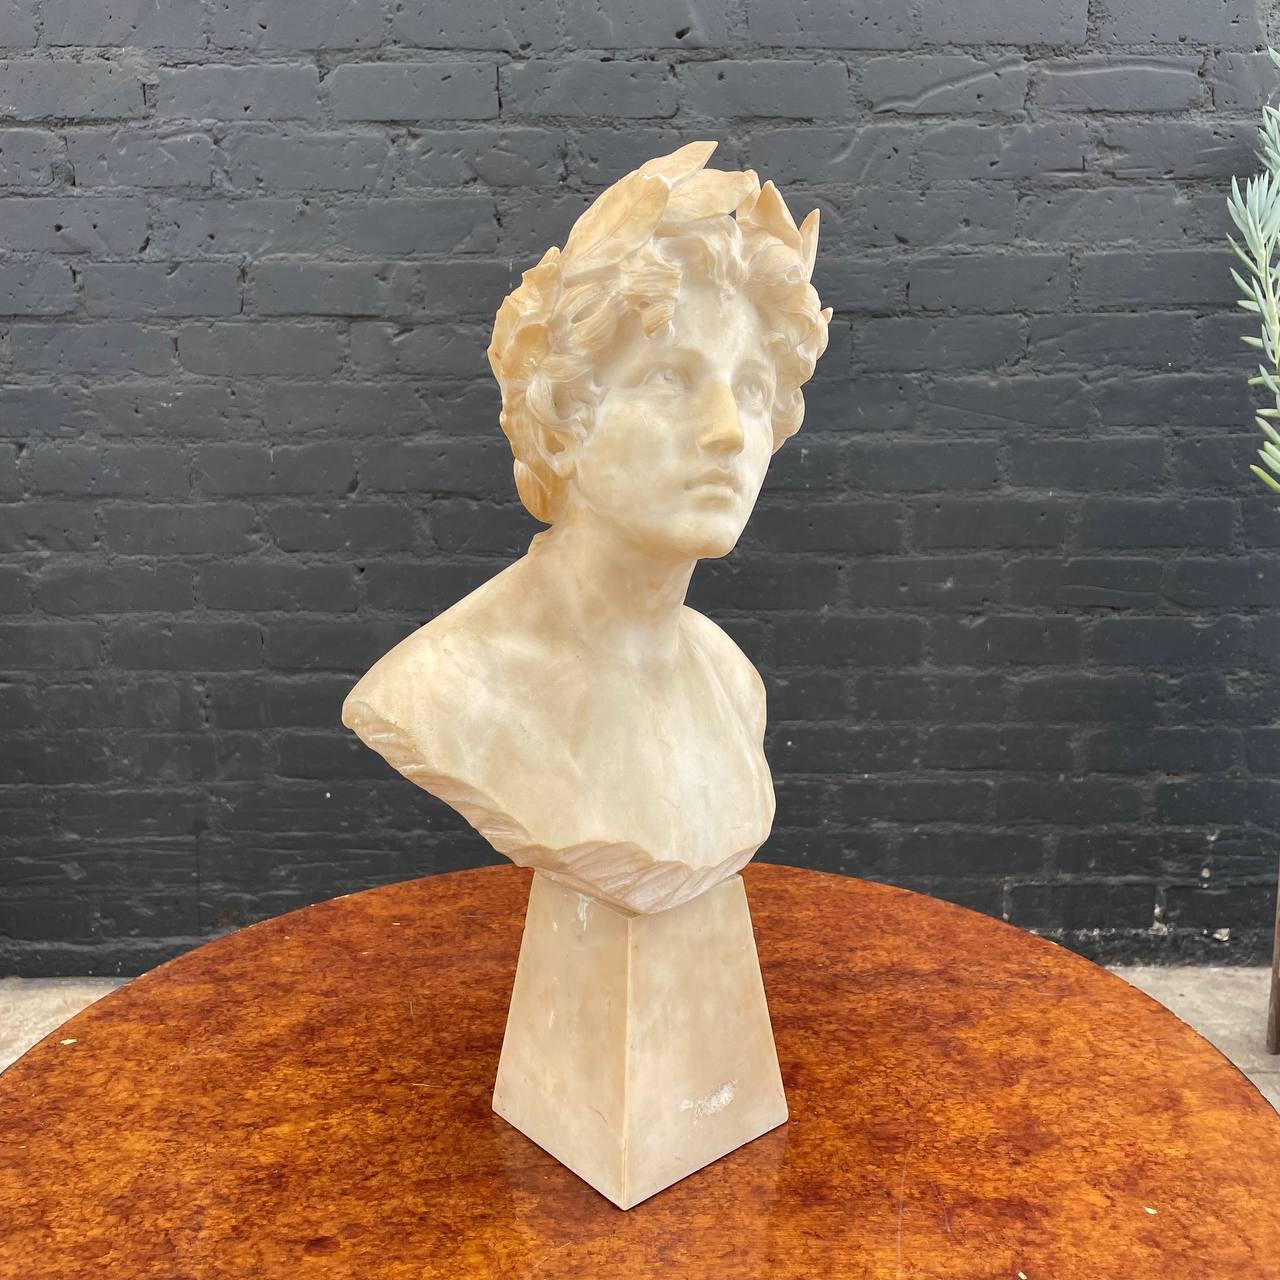 Signed Carved Alabaster Neoclassical Sculpture of Giuseppe Bessi Bust on Stand

Country: France
Materials: Alabaster
Condition: Original Condition
Style: French Neoclassical 
Year: 1920’s

$1,895

Dimensions:
21”H x 11.50”W x 8”D
